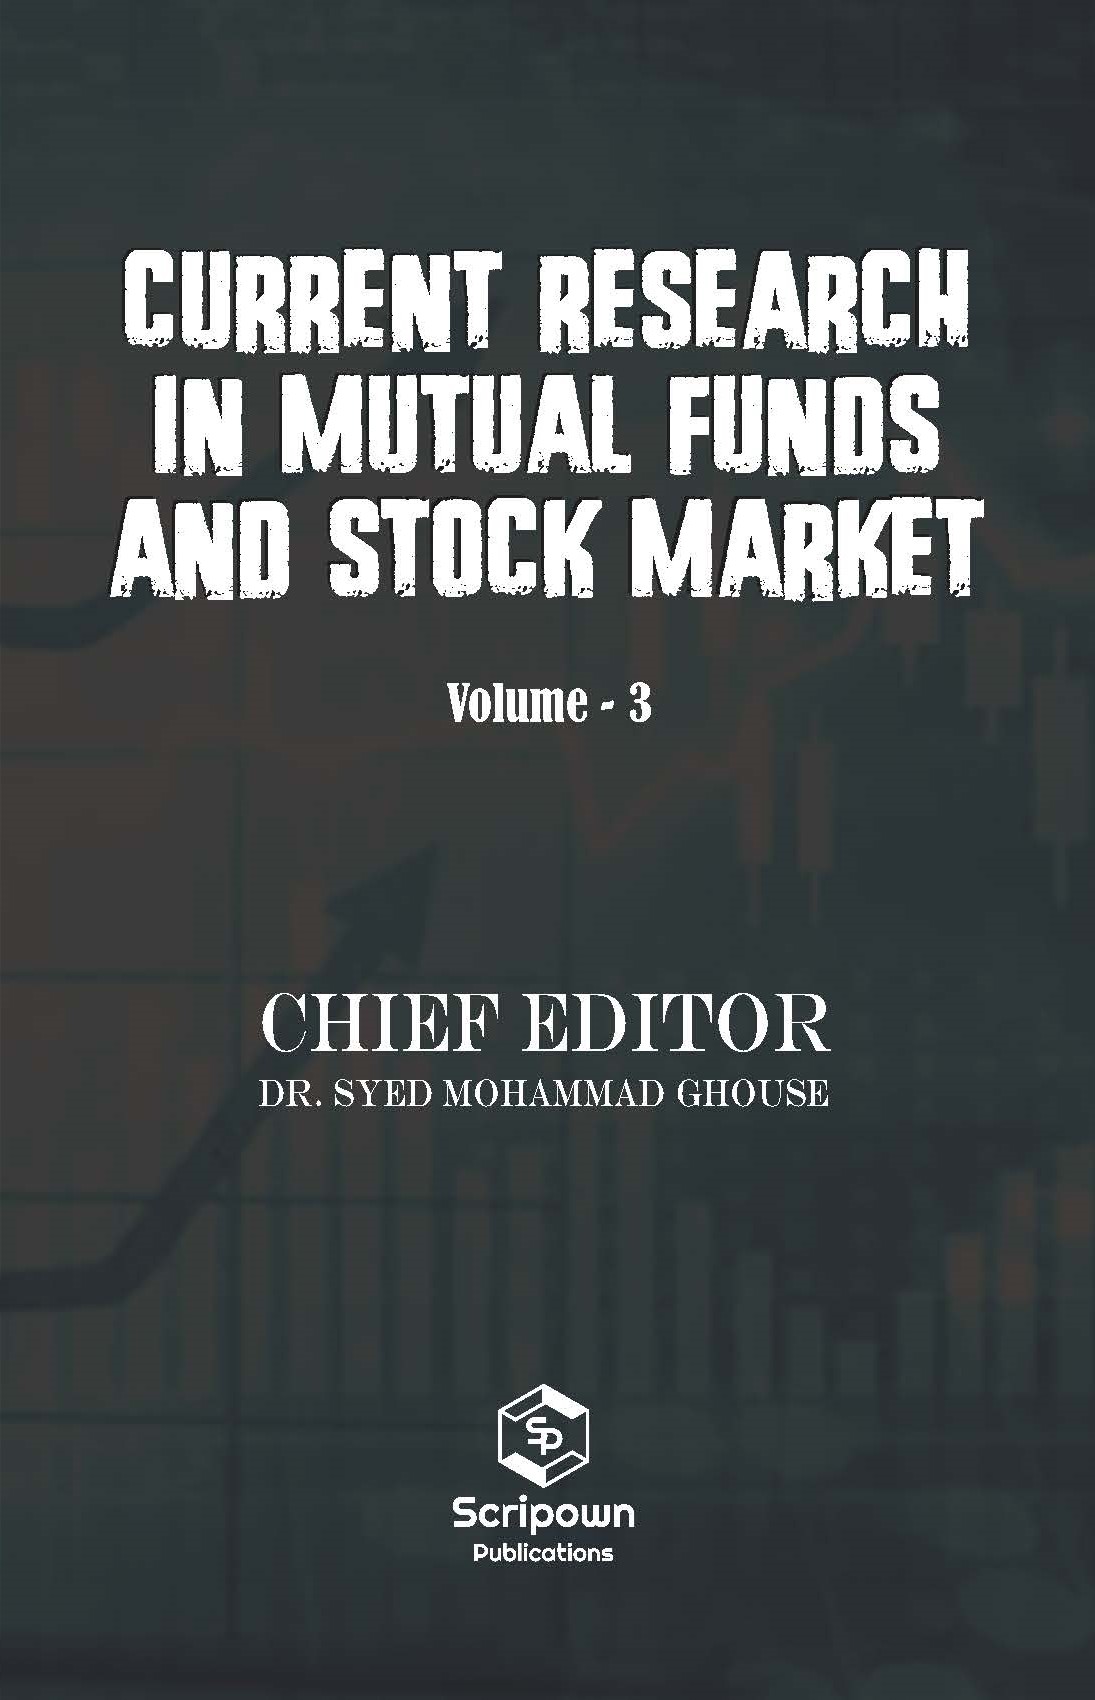 Current Research in Mutual Funds and Stock Market (Volume - 3)